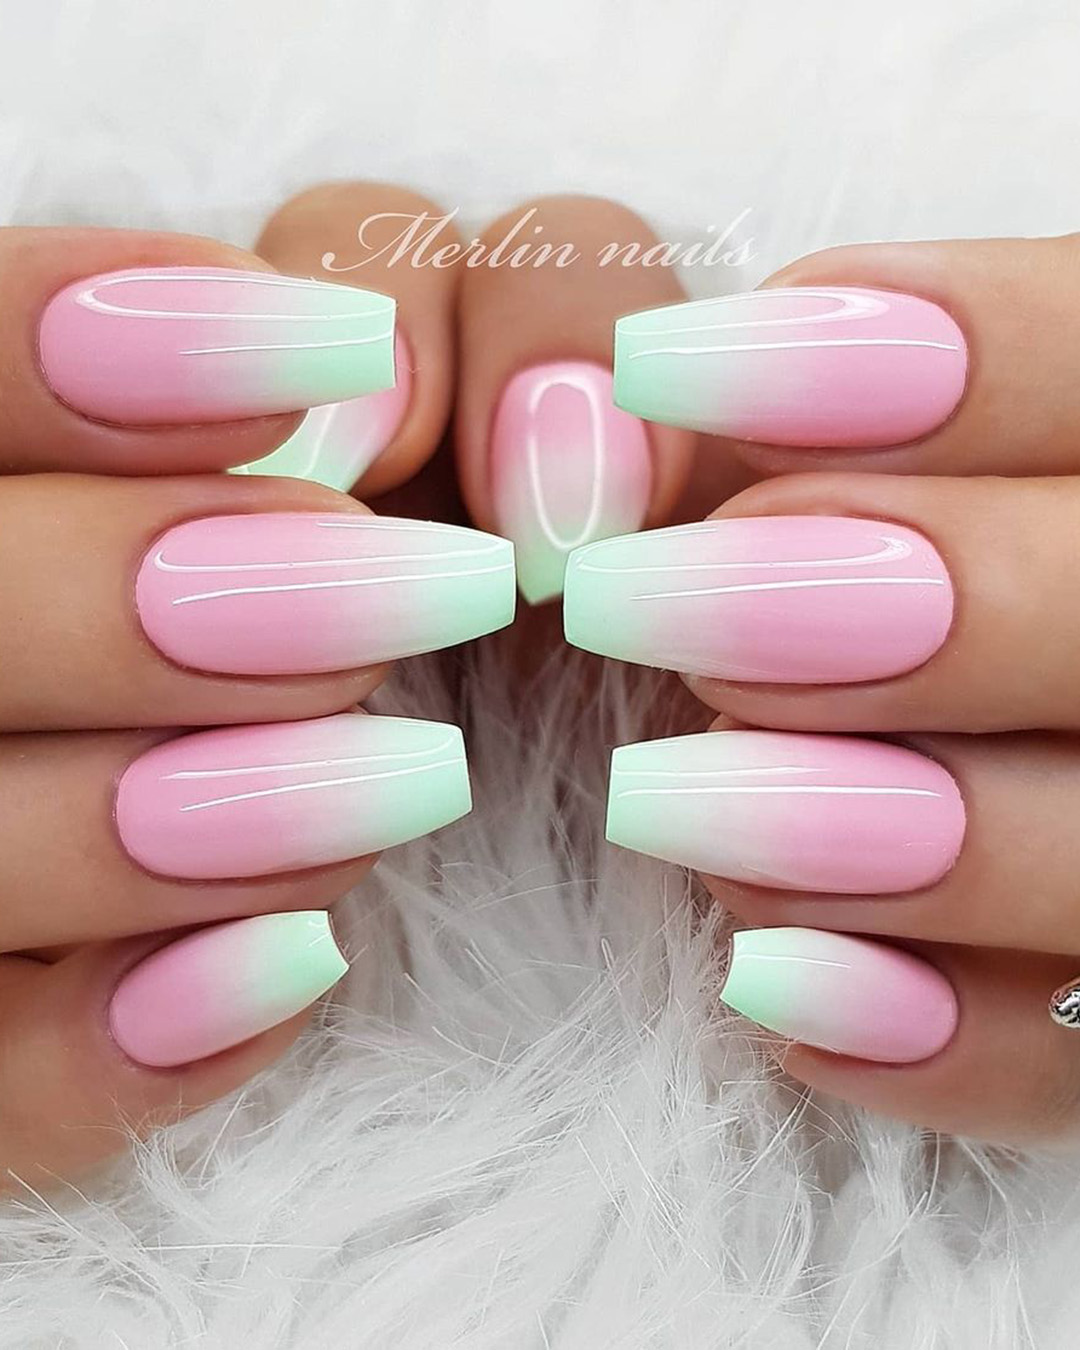 coffin wedding nails classy ombre merlin_nails